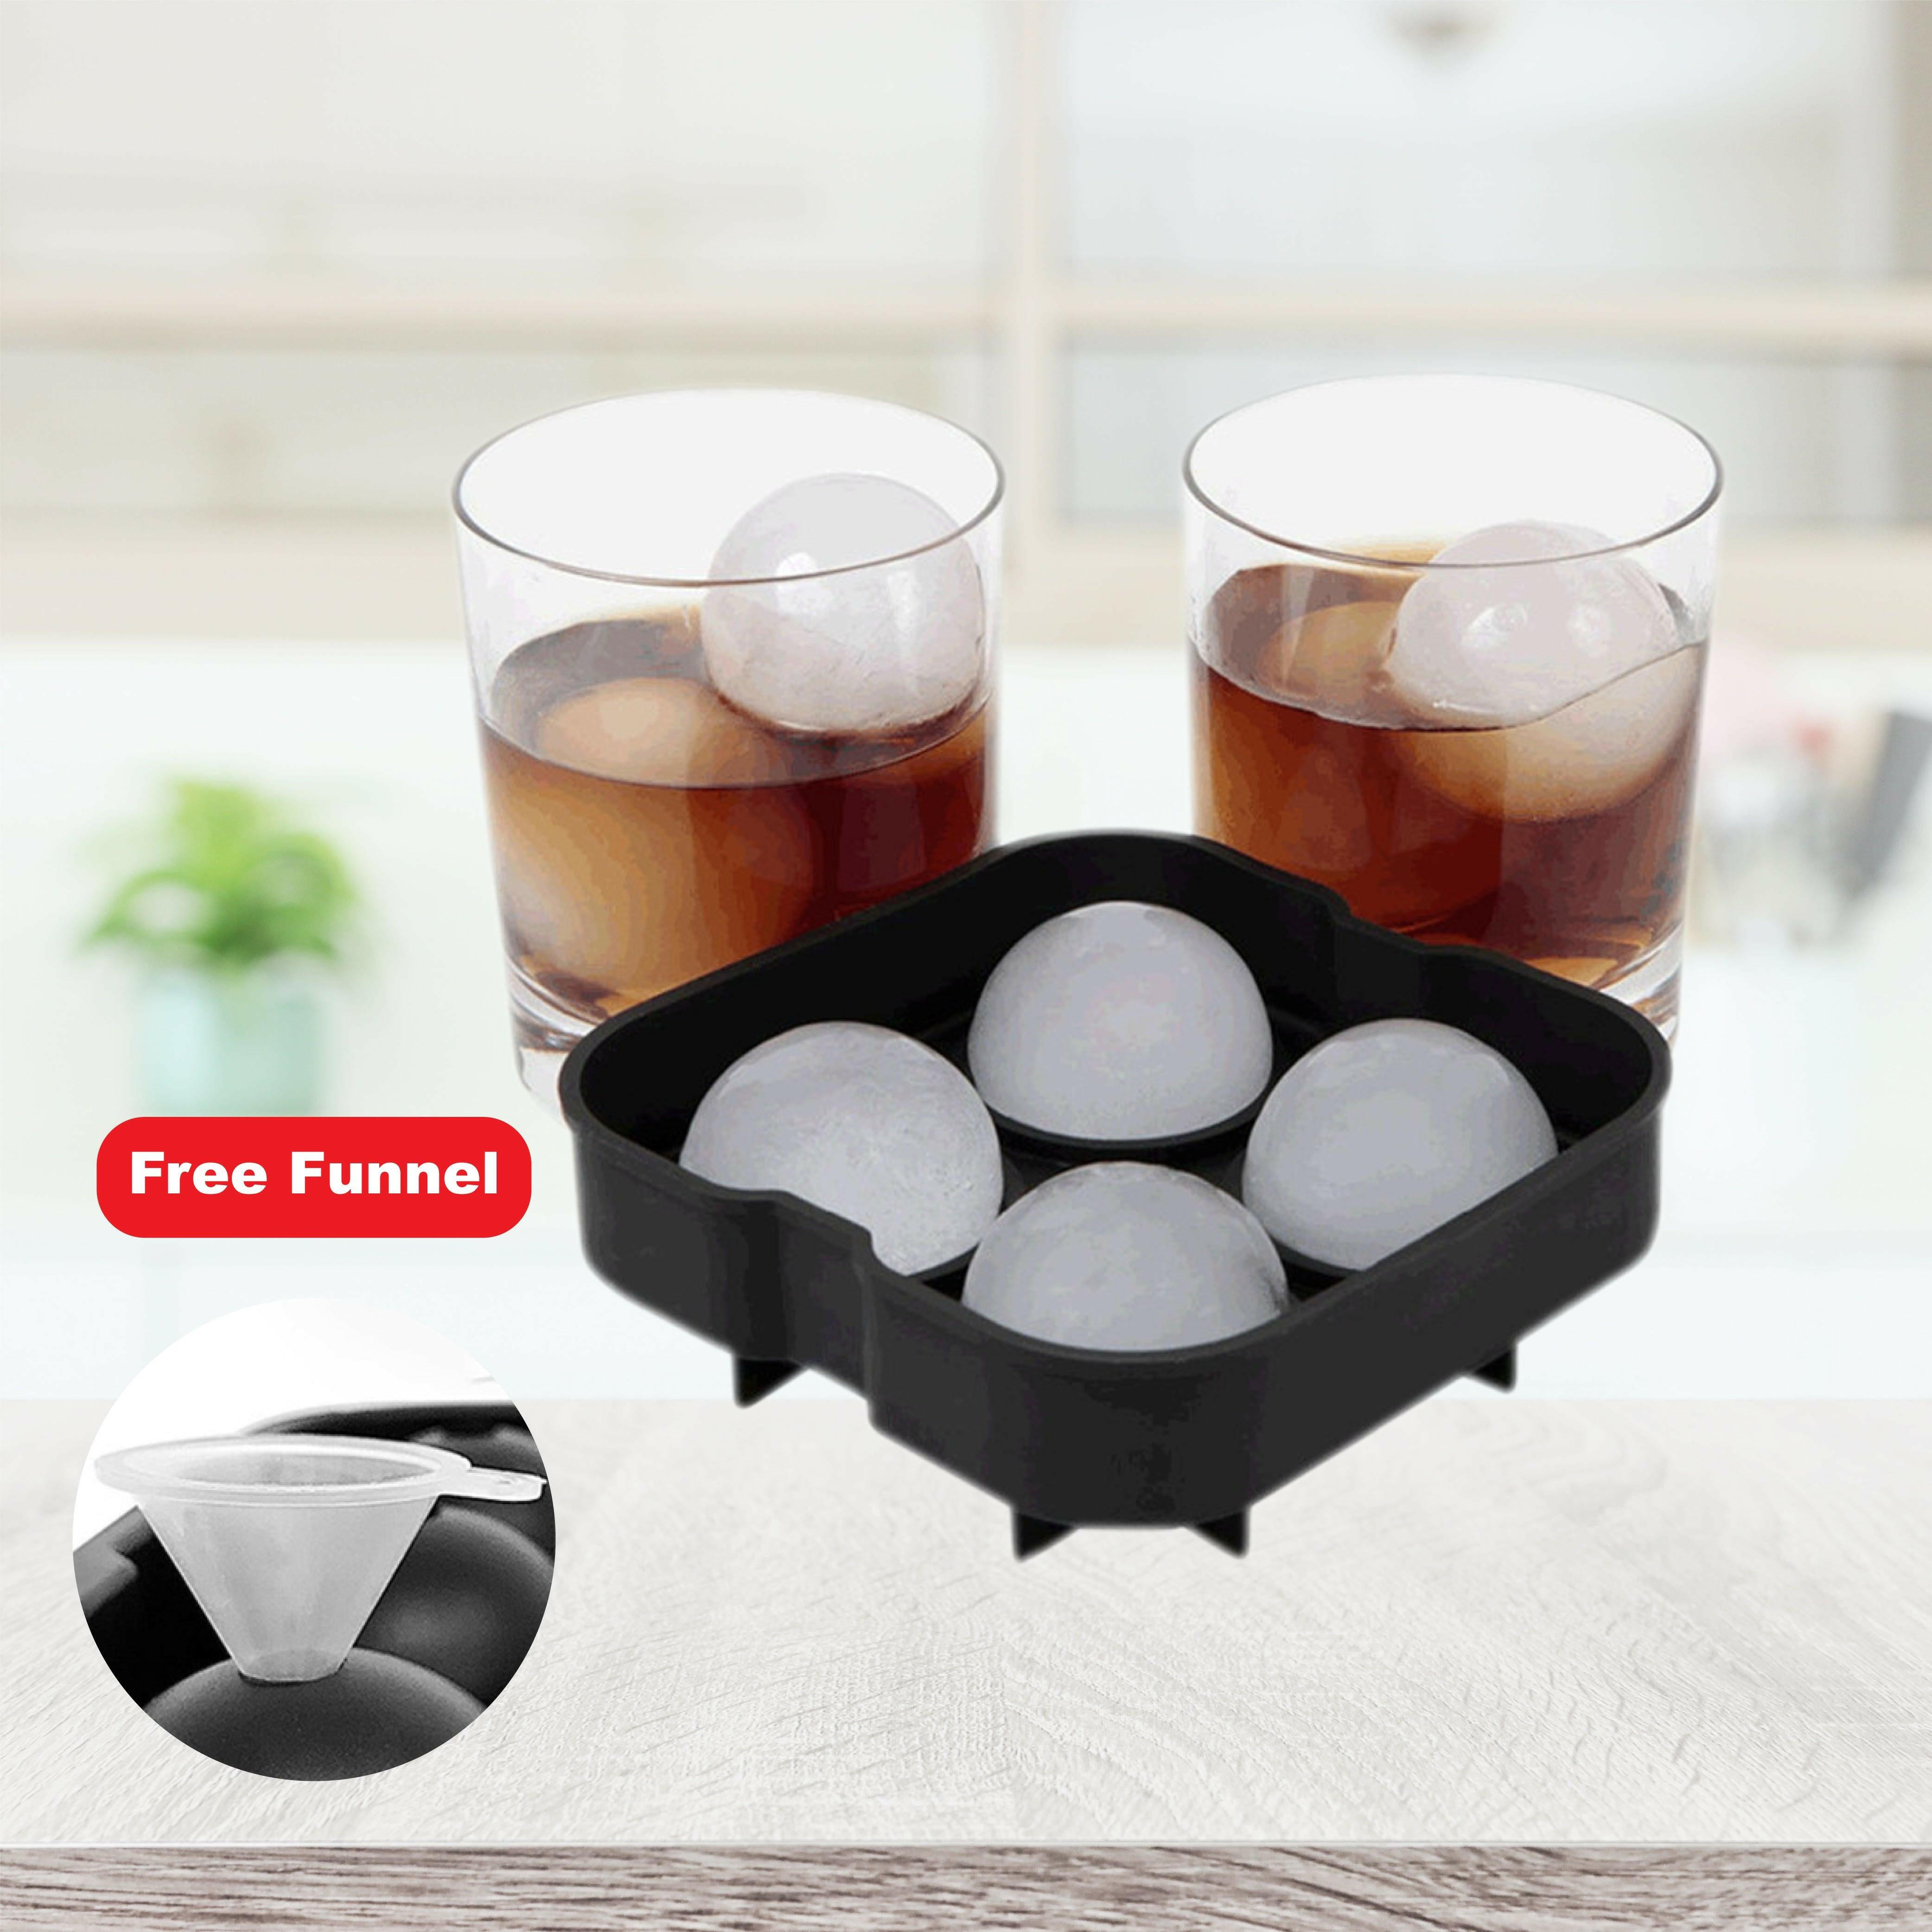 Hydro Mate Whiskey Ice Ball Maker Silicone Cube Tray, Hydro Mate